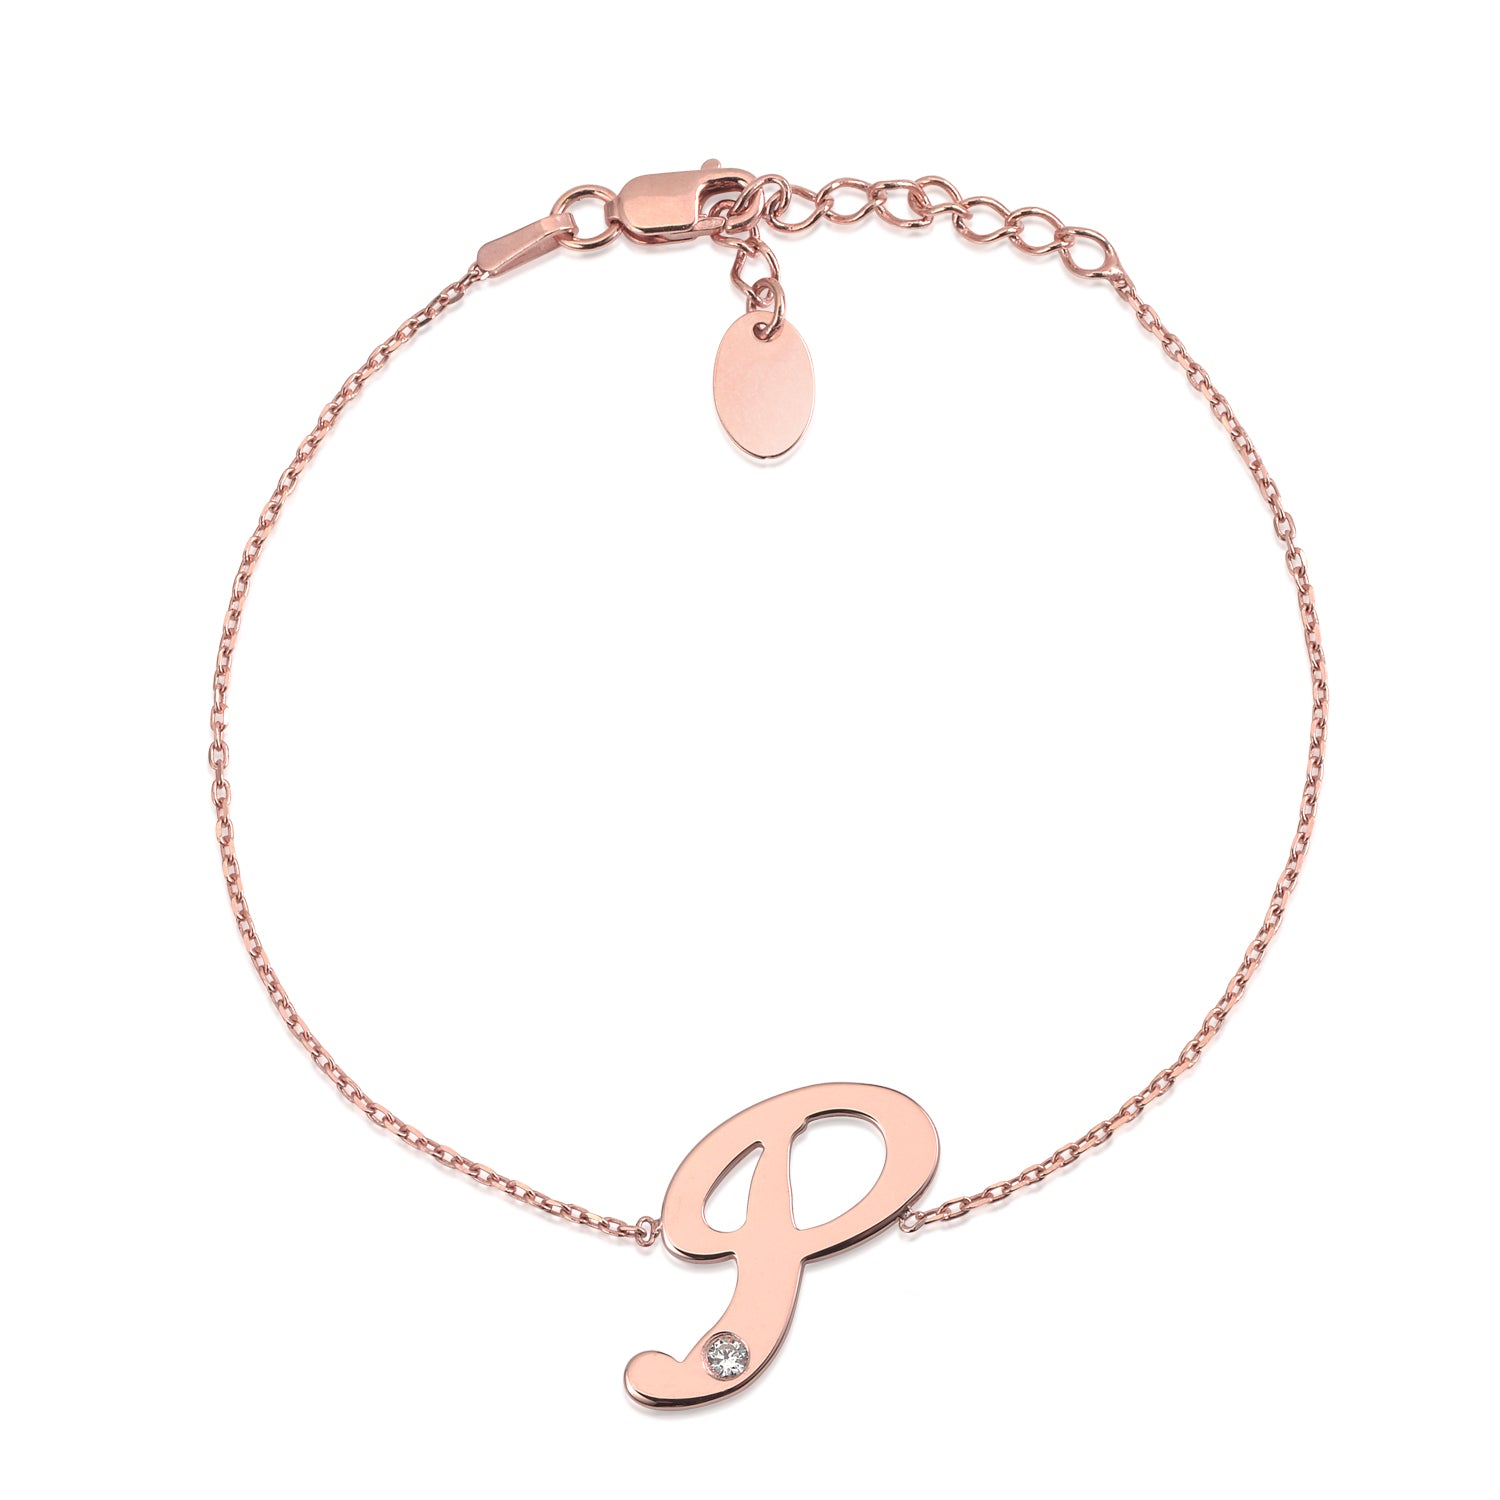 Buy Alphabet Initial S Silver Rhodium Plated Bracelet at